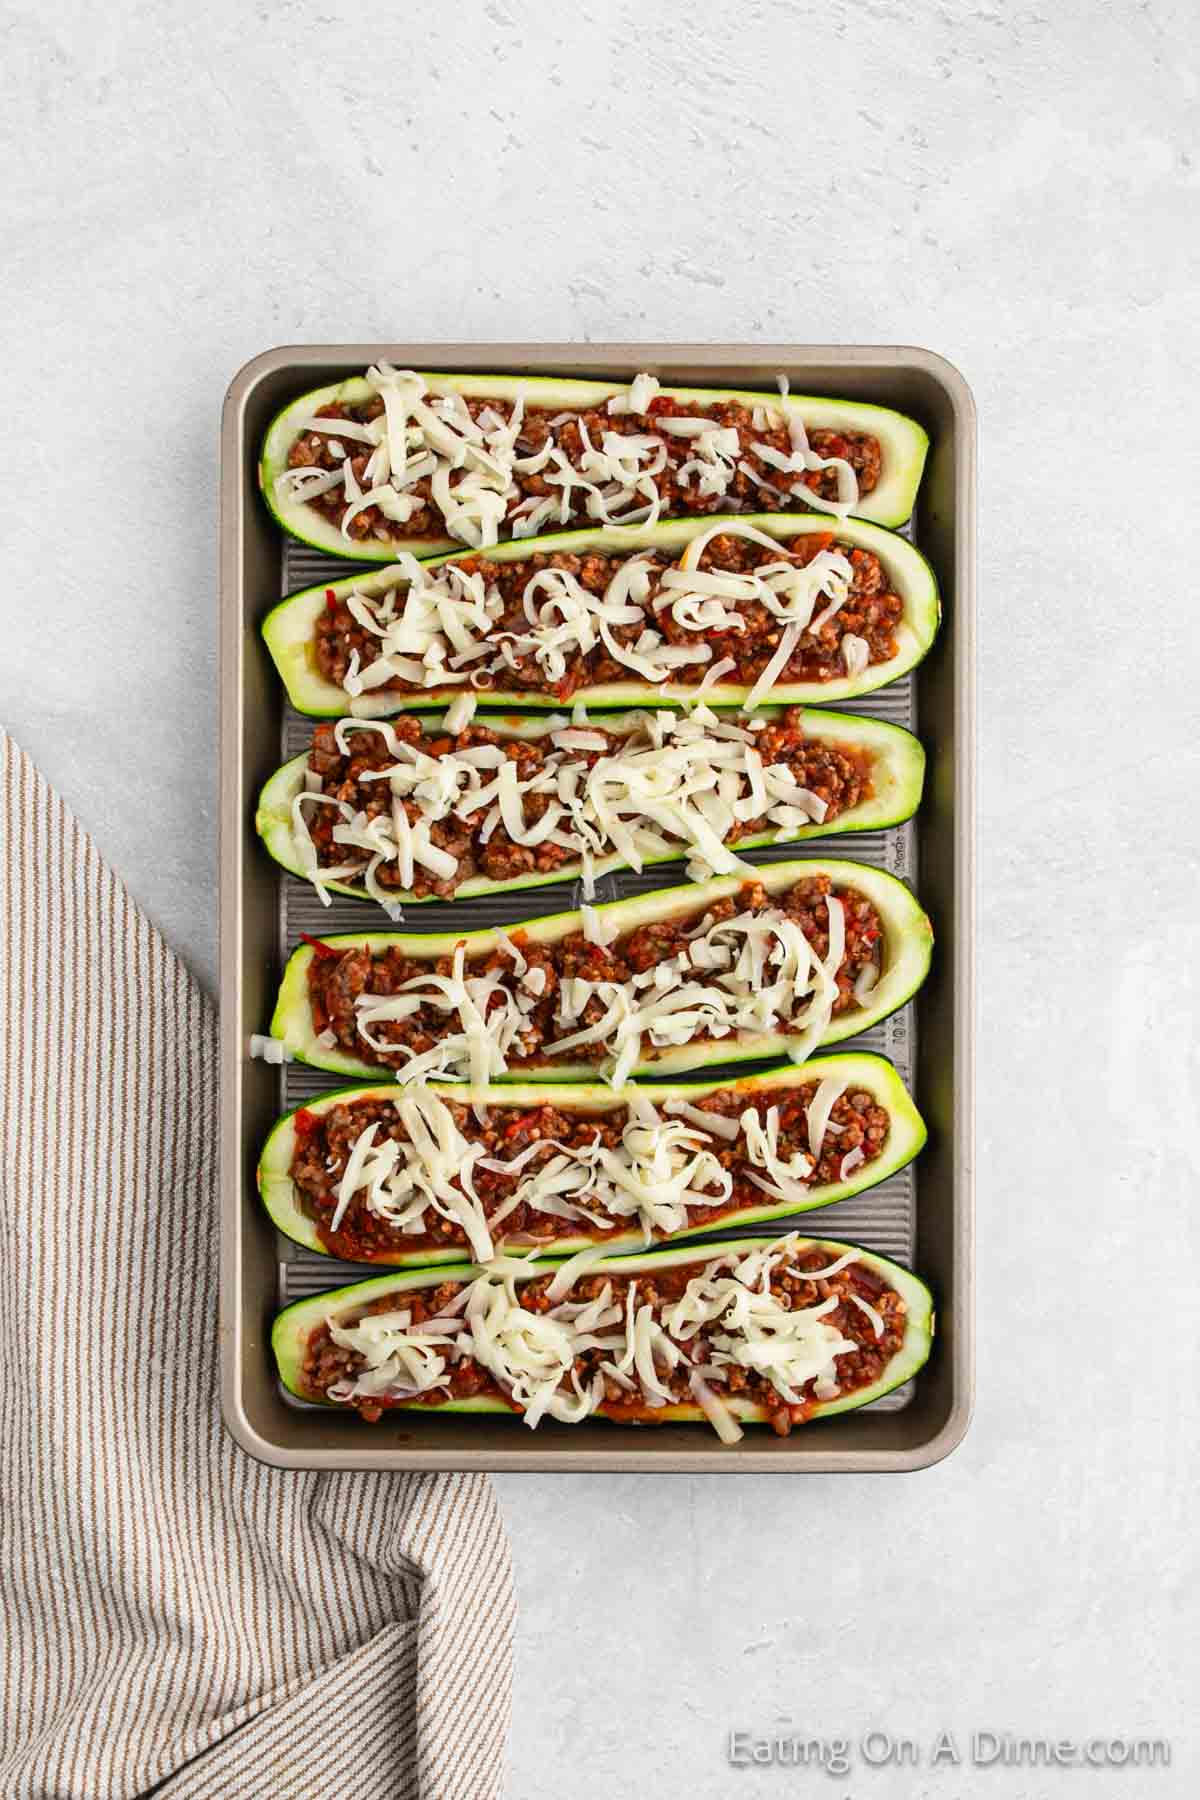 A baking tray filled with six hollowed zucchini halves, stuffed with a mixture of ground meat, sauce, and topped with shredded cheese, ready to be baked. A striped kitchen towel is placed to the left of the tray on a light-colored countertop—a delicious stuffed zucchini boats recipe in the making.